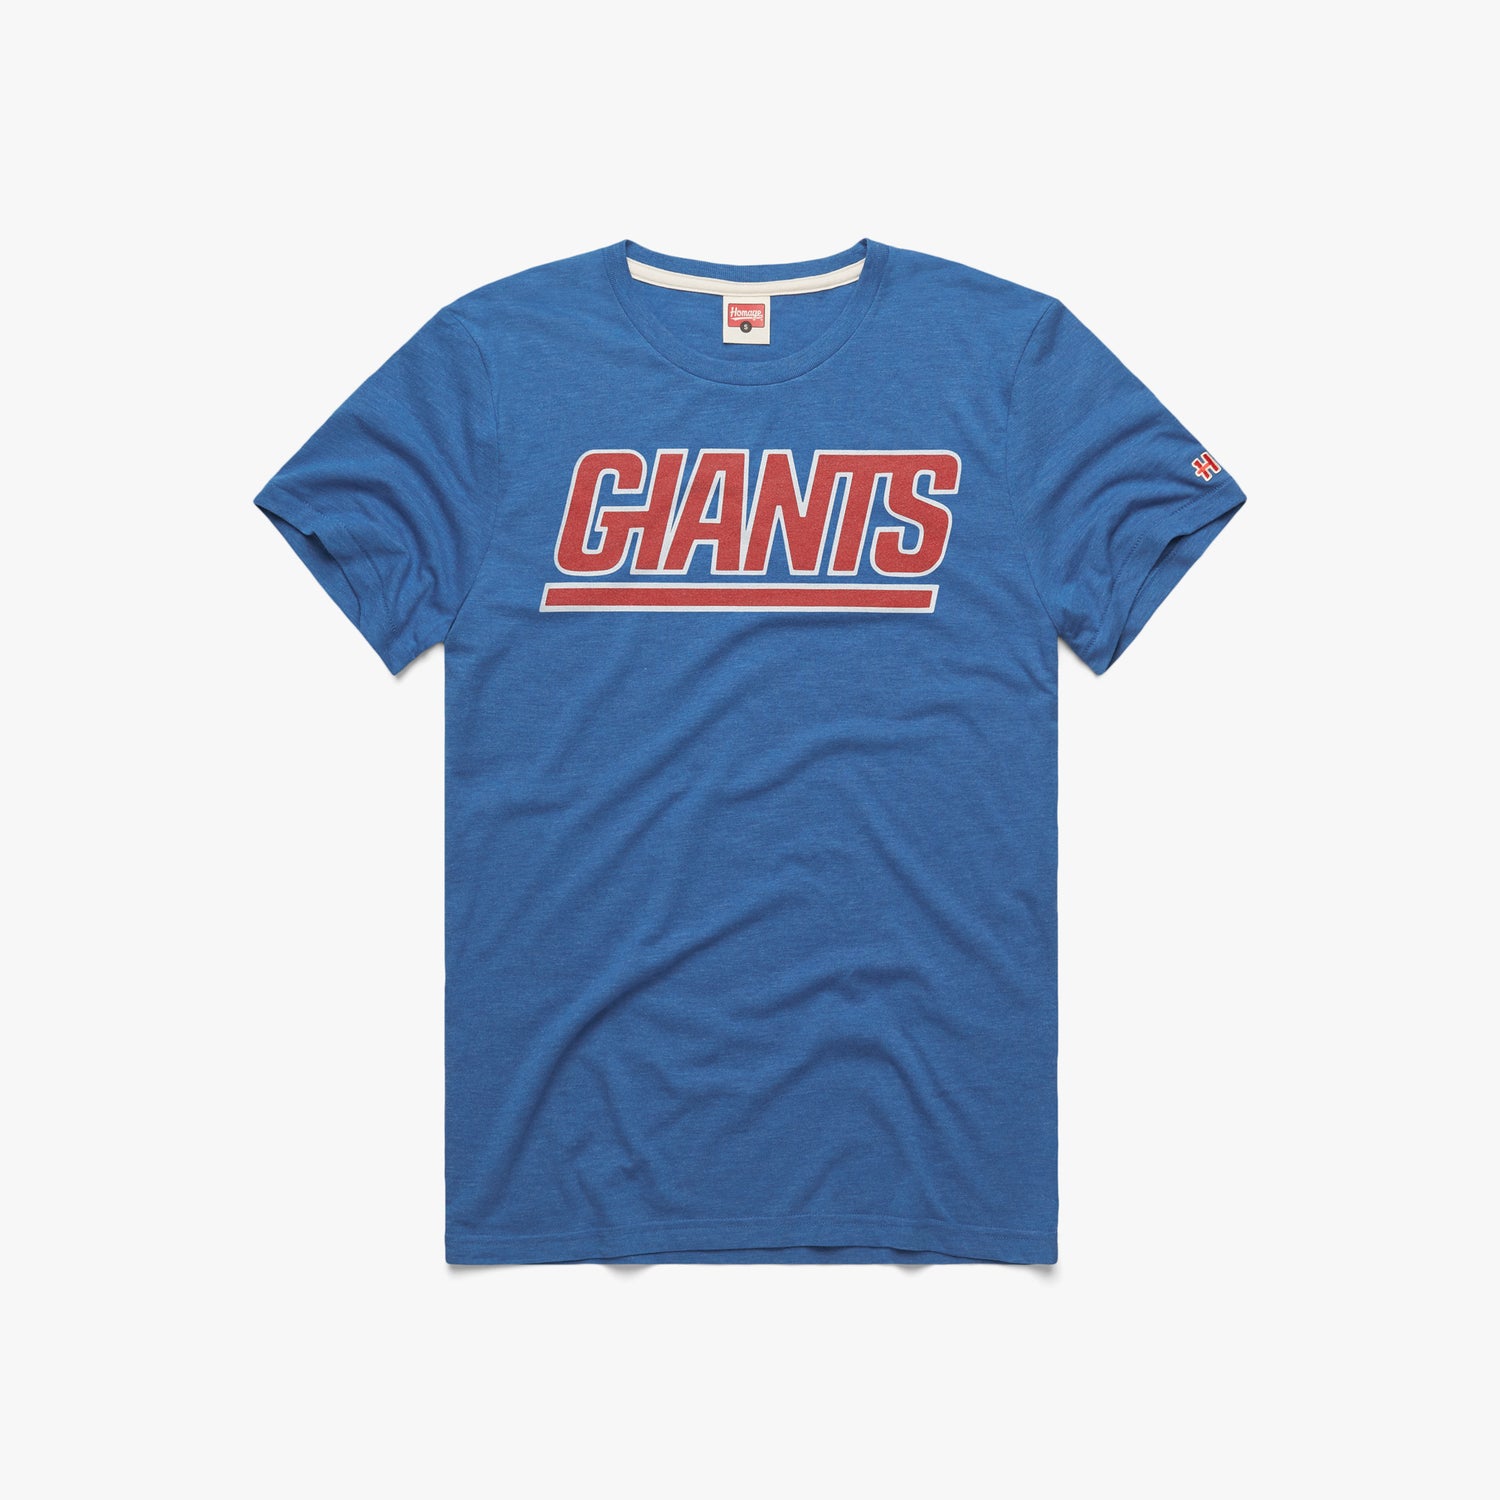 New York Giants '76 T-Shirt from Homage. | Officially Licensed Vintage NFL Apparel from Homage Pro Shop.